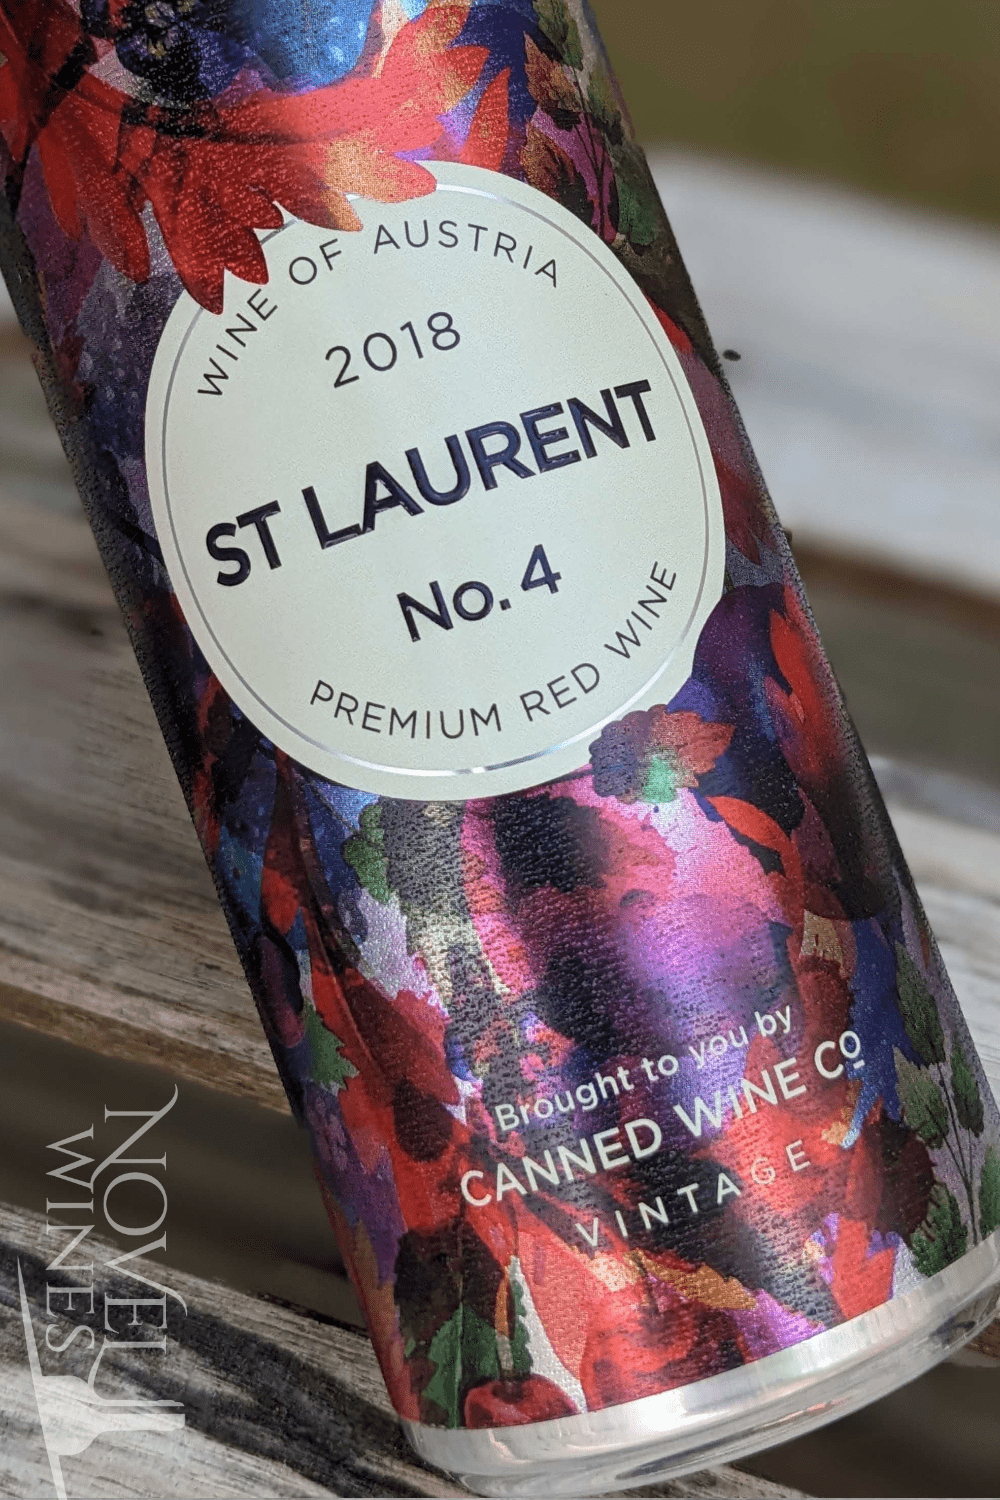 Canned Wine Co Red Wine Canned Wine Co. Vintage St Laurent 2018, Austria